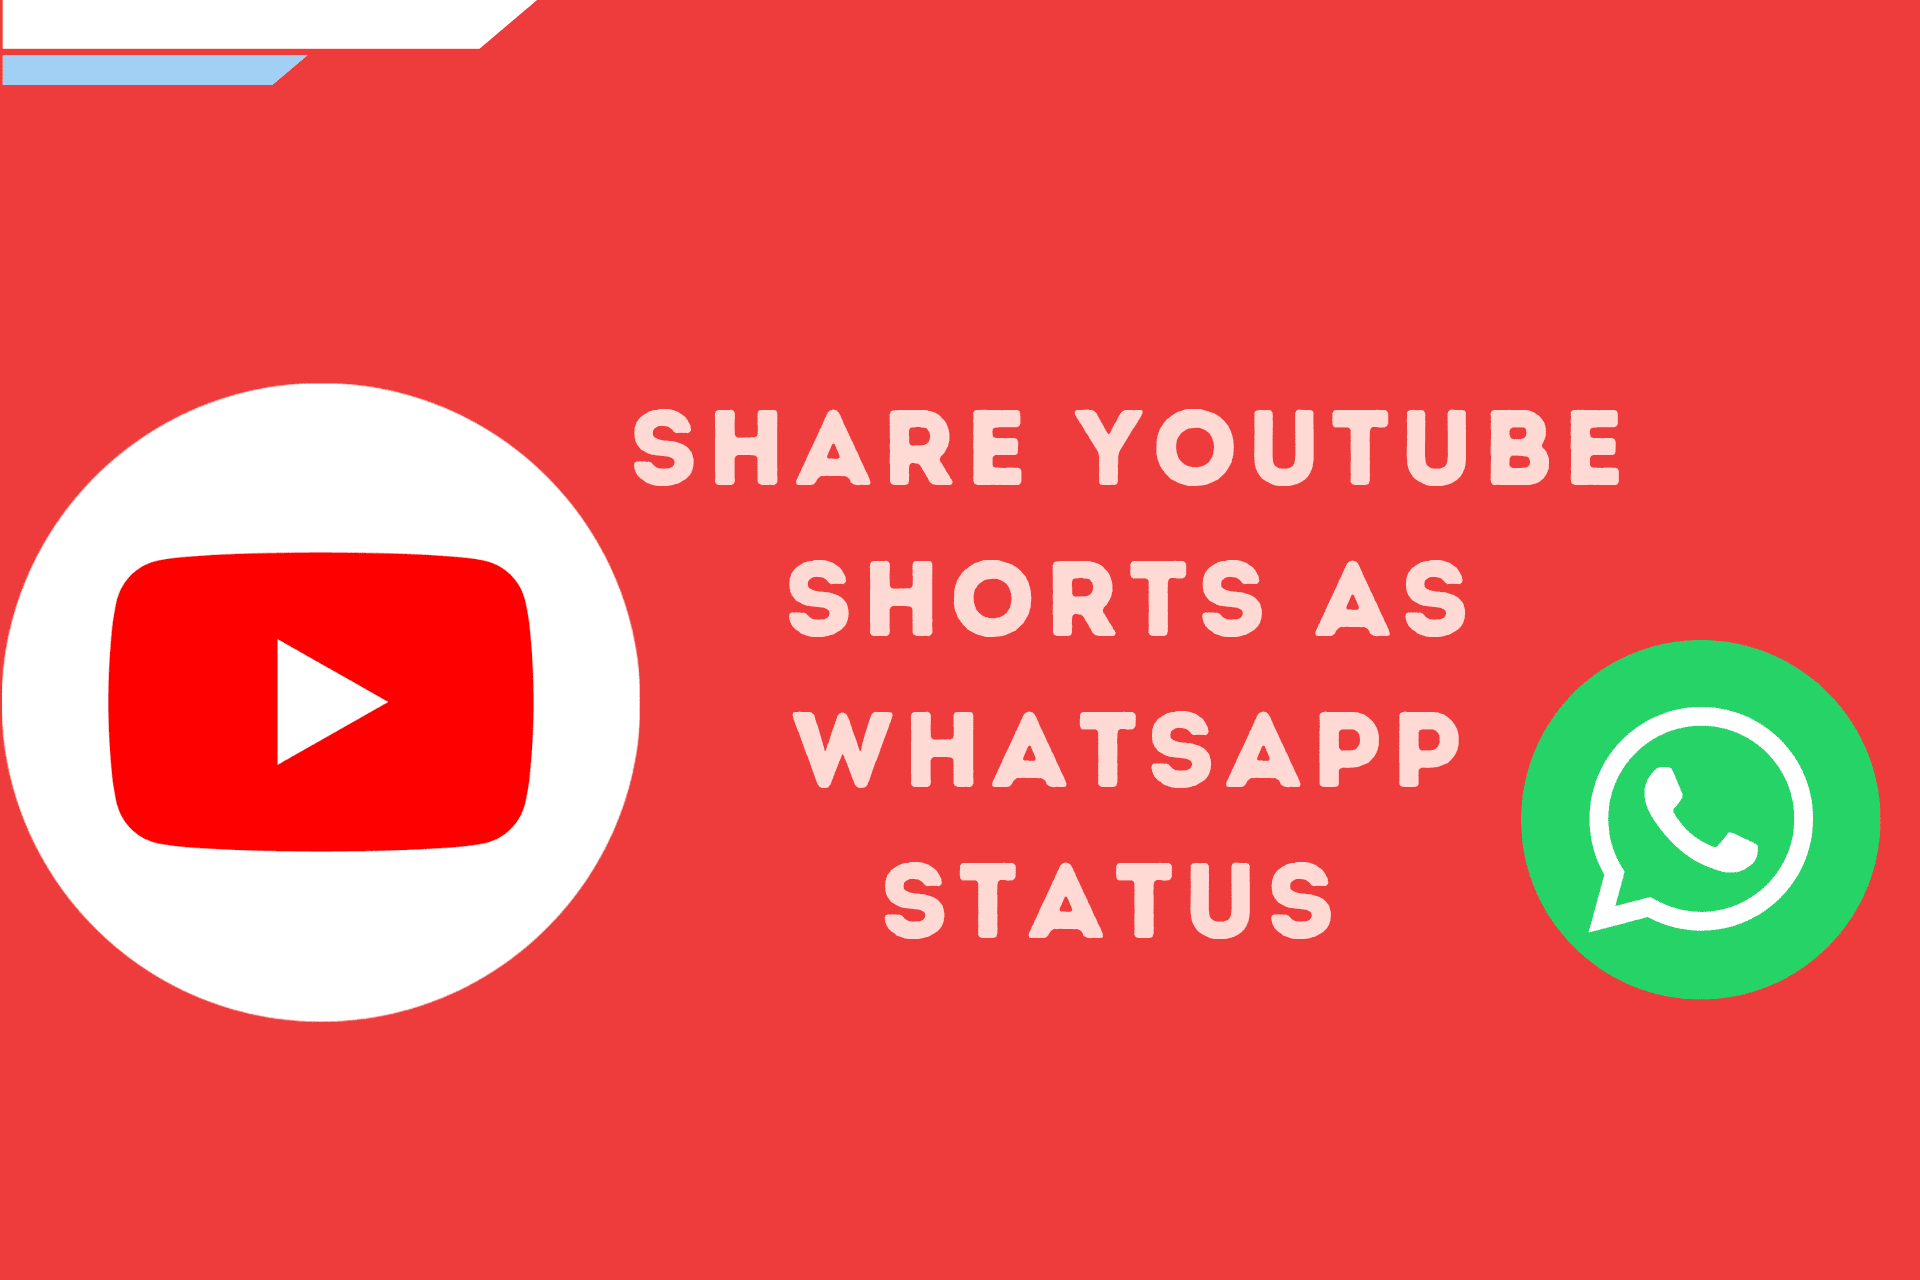 3 Easiest Ways To Share YouTube Shorts on WhatsApp